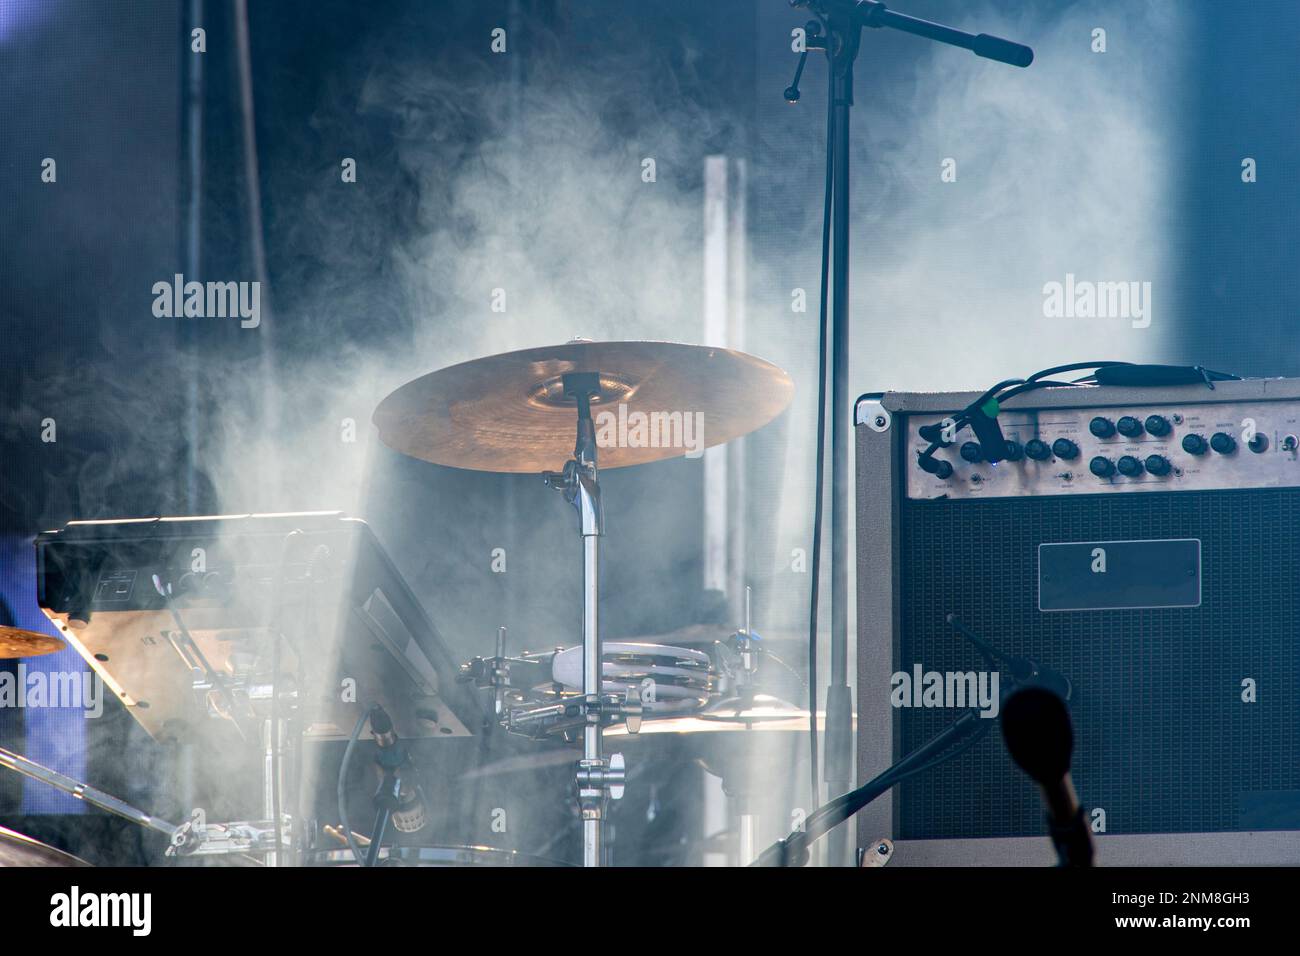 Sound reinforcement equipment, drum equipment, and microphone stands on a stage in stage smoke Stock Photo